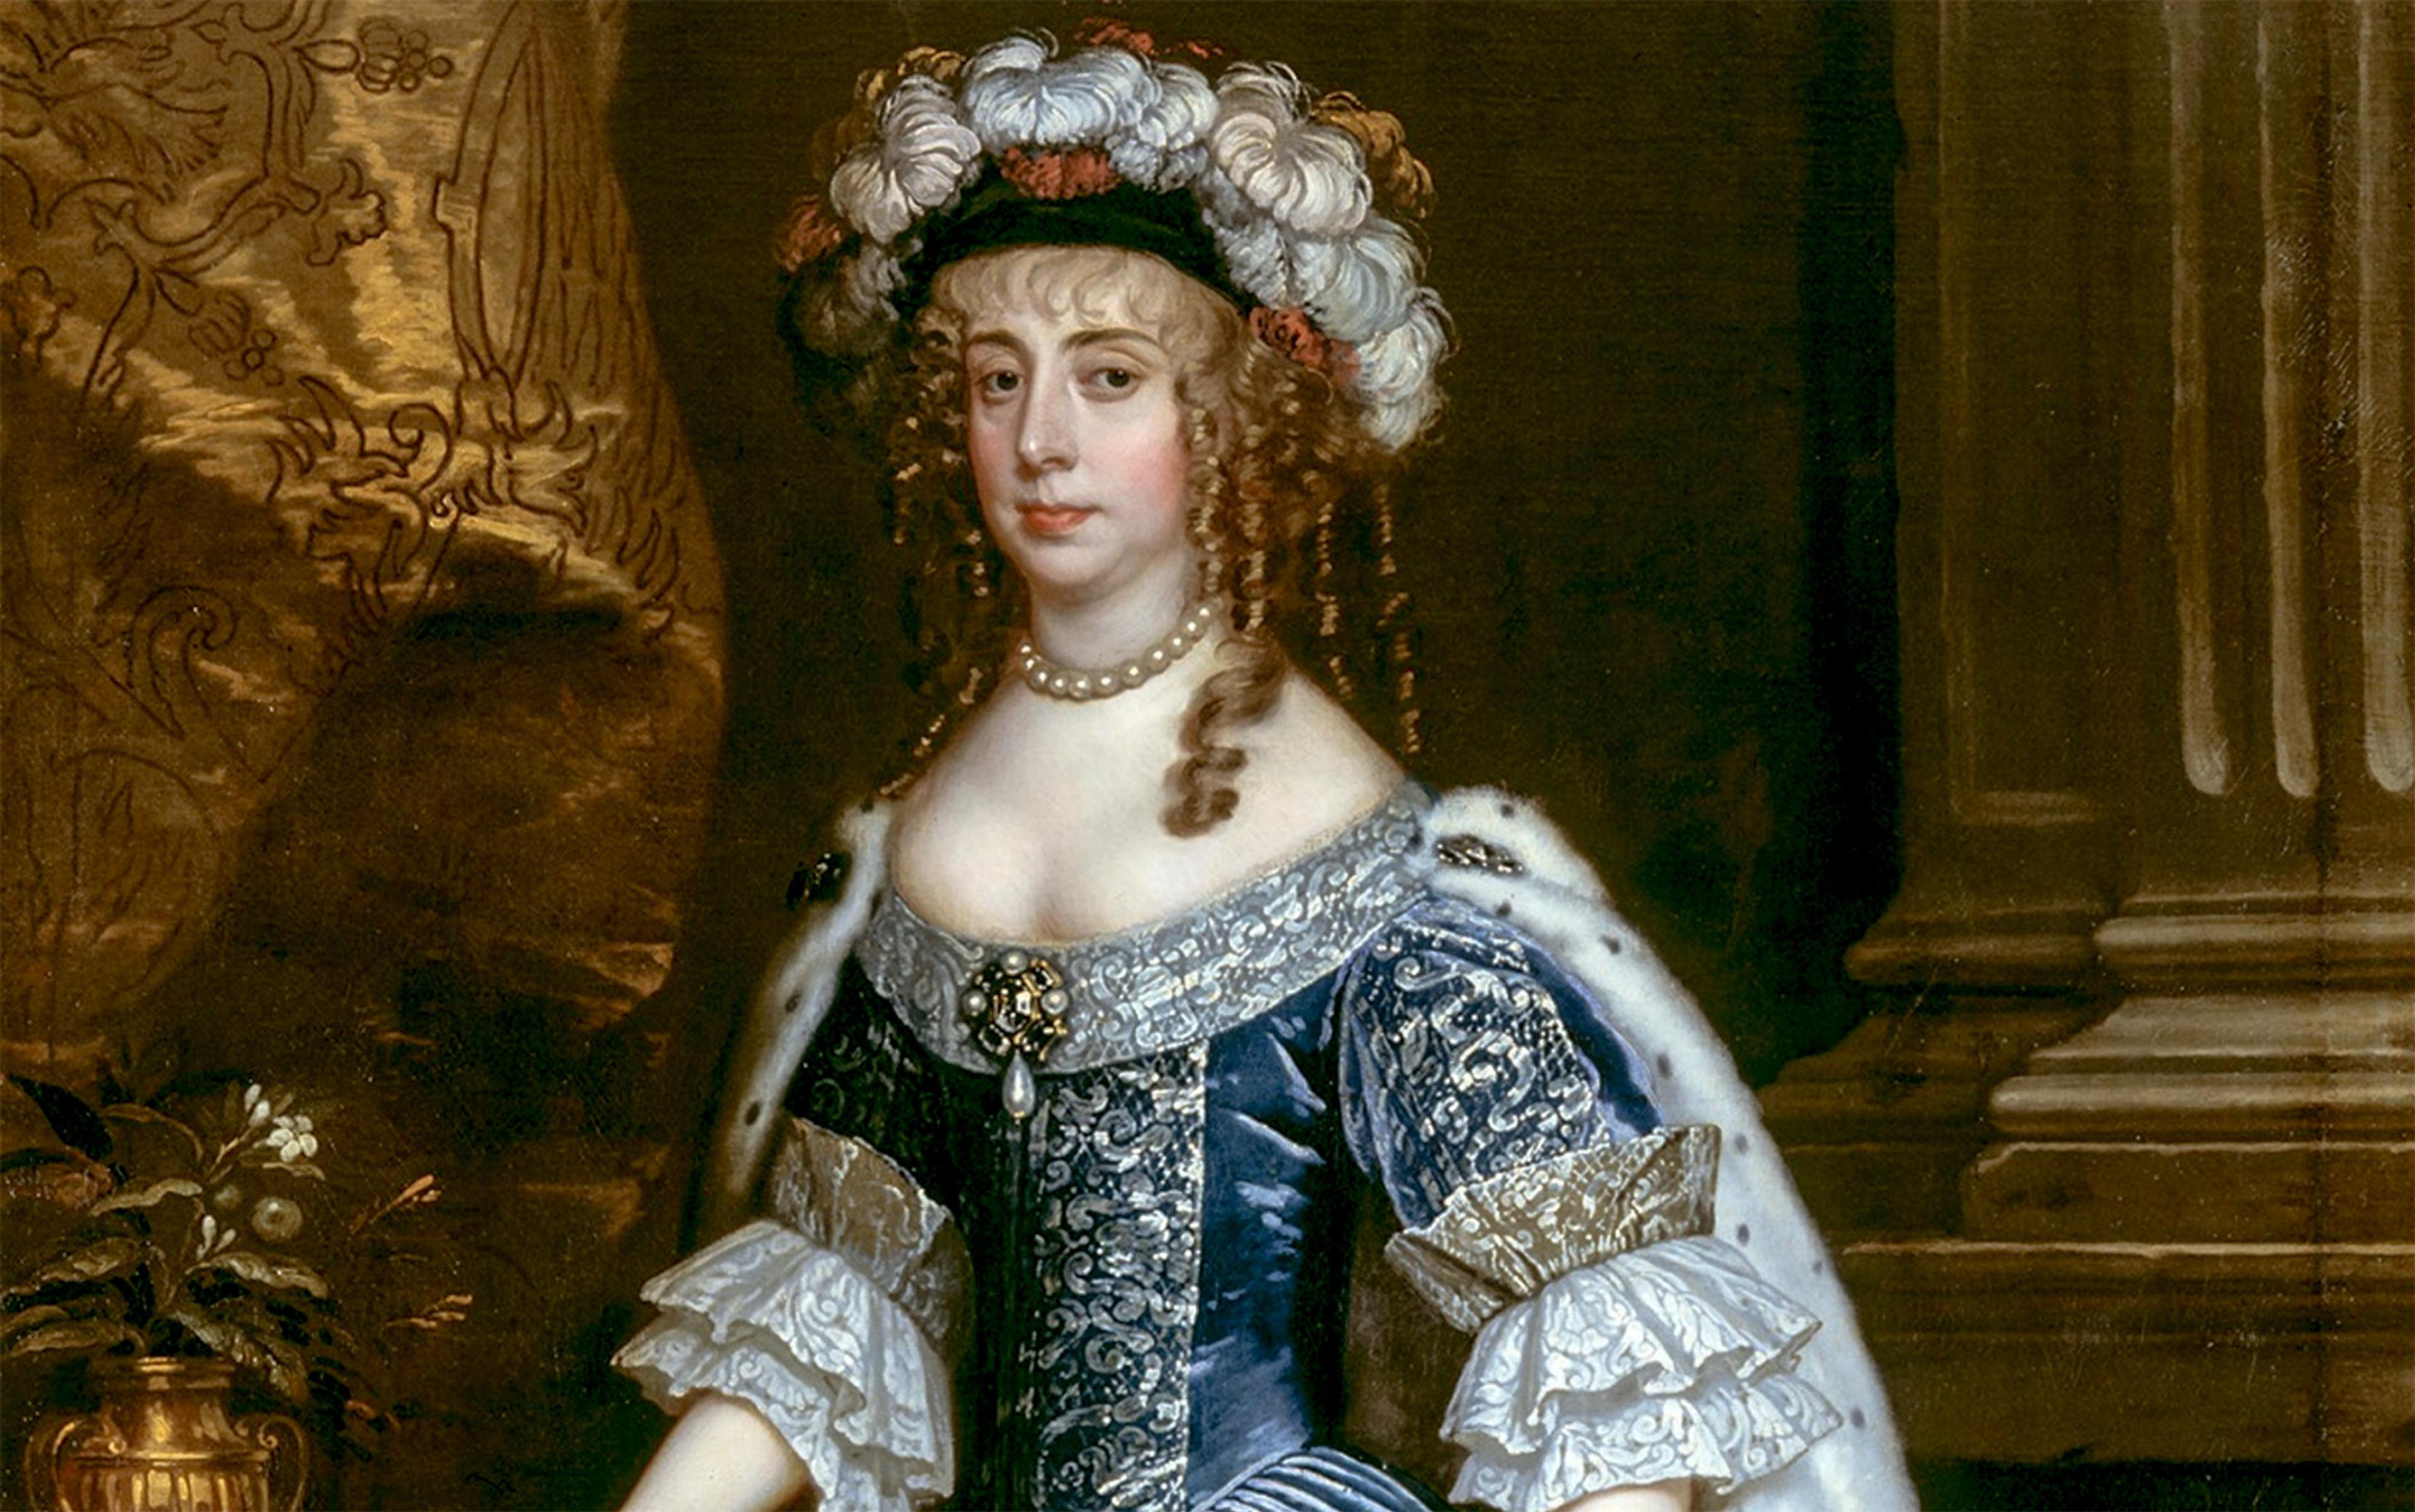 A historical painting of a woman in a detailed blue and silver gown with lace sleeves. She wears a pearl necklace and a hat adorned with white and pink flowers. The background features a golden tapestry and dark pillars.